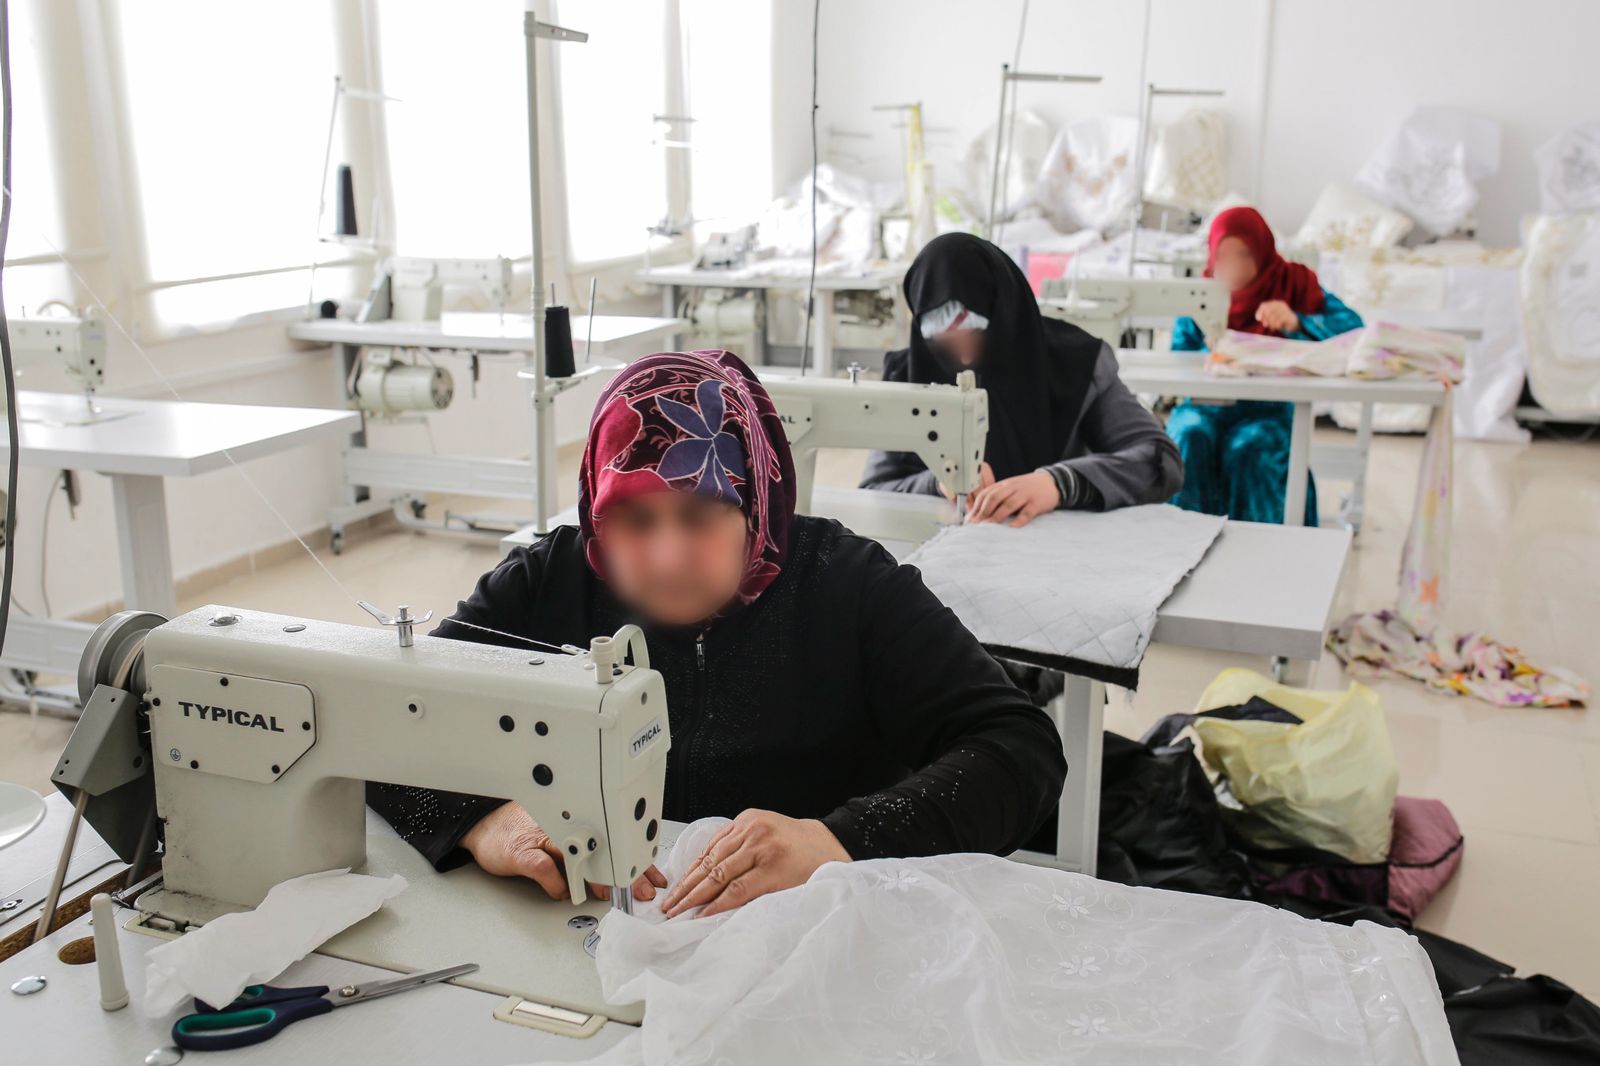 Turkey’s fast fashion is rising on the backs of Syrian refugees